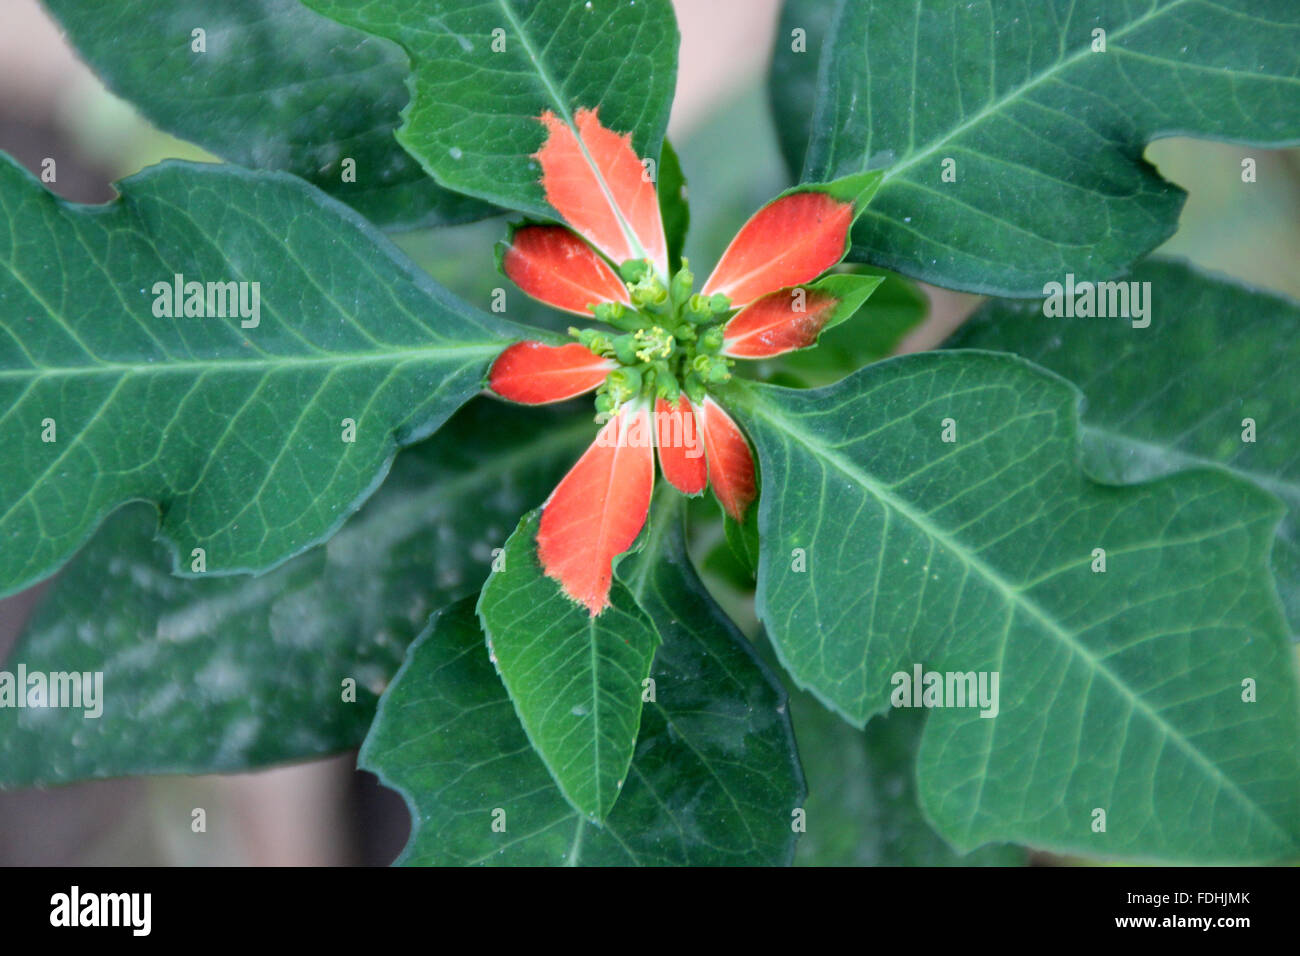 Euphorbia cyathophora, Wild Poinsettia, herbaceous plant with red leaves especially in basal part, surrounding cyathia infl Stock Photo